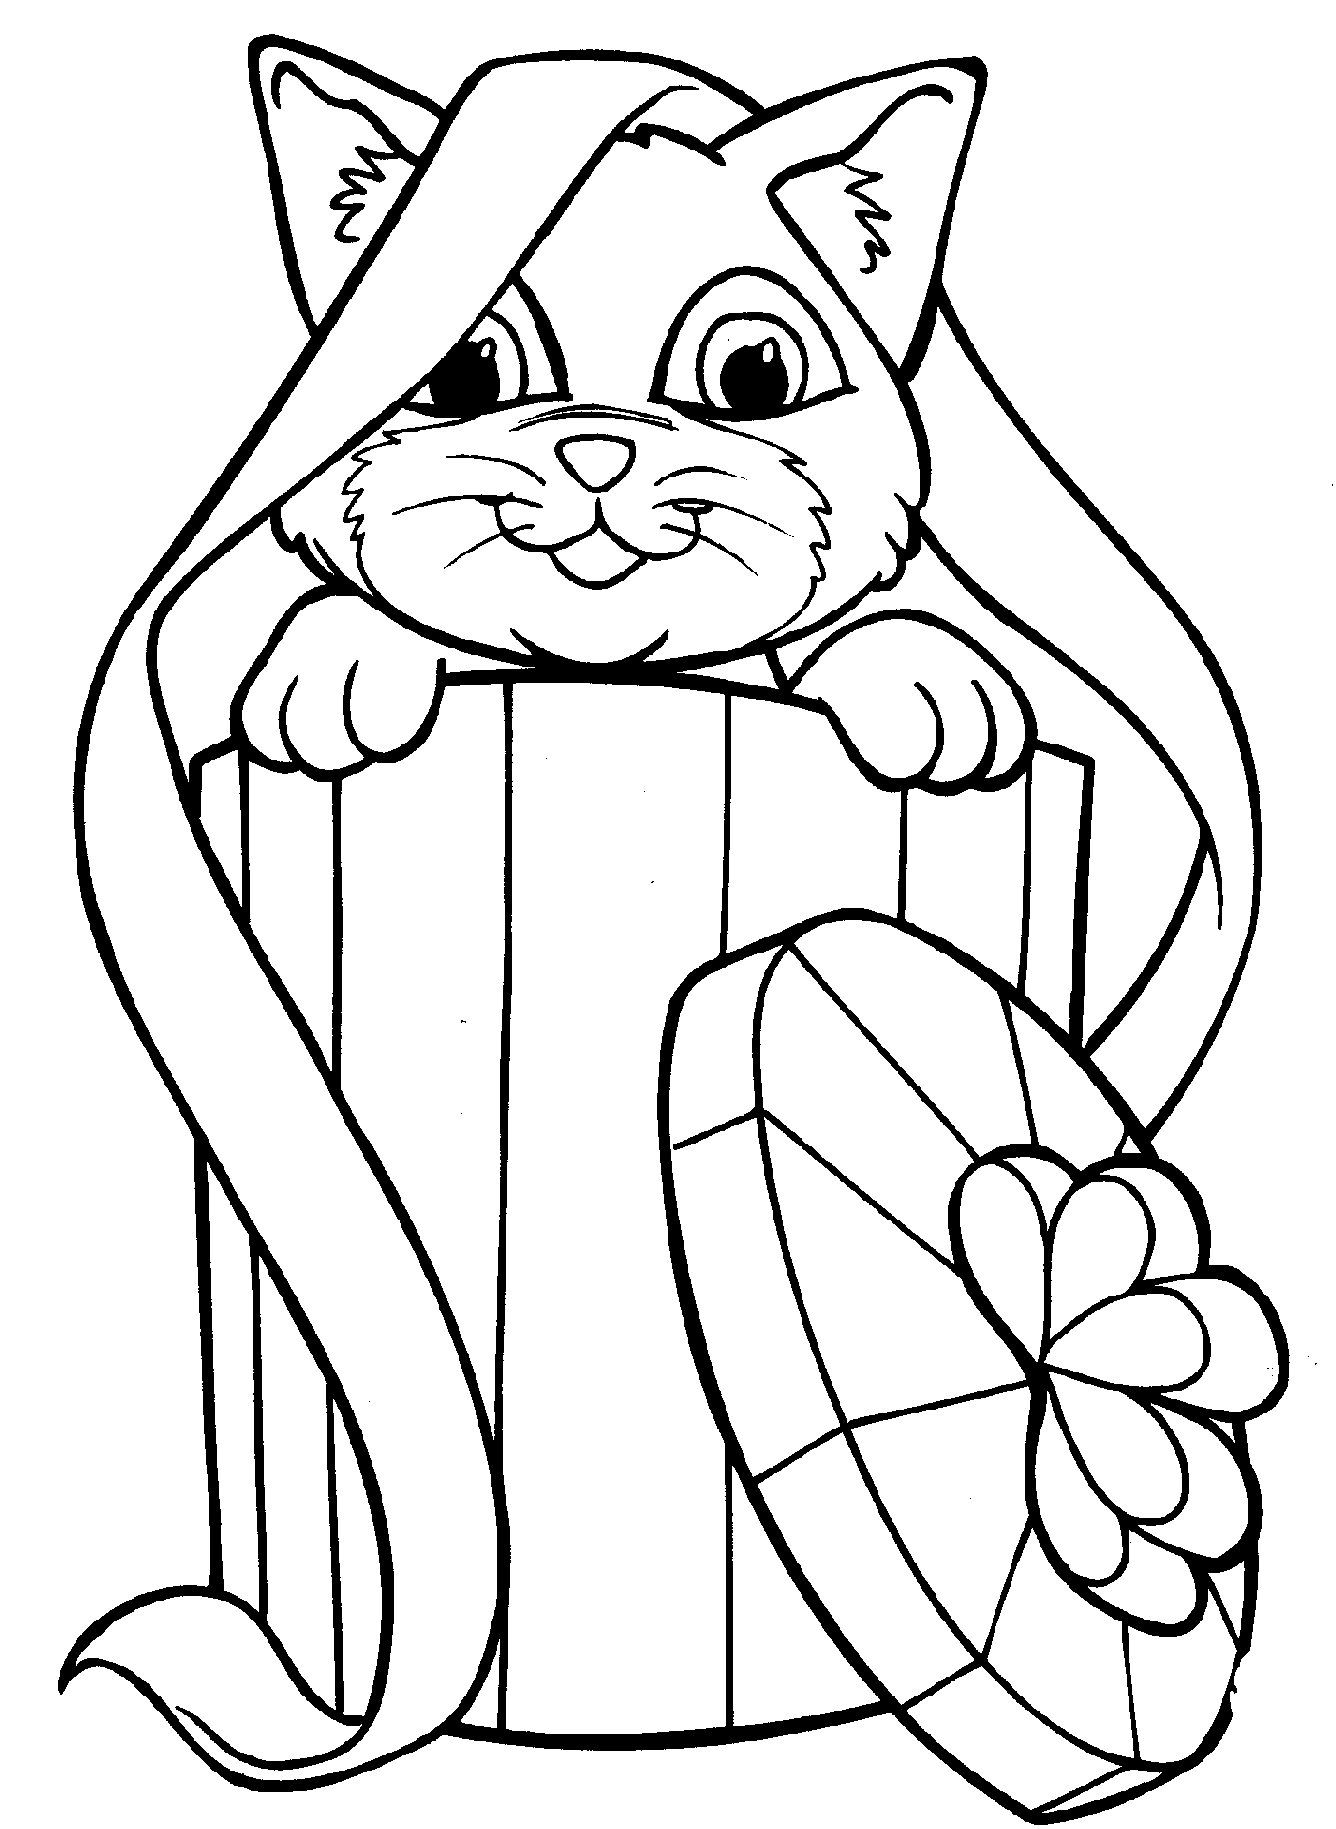 coloring pages cute cats cute kitten coloring pages to download and print for free cats pages cute coloring 